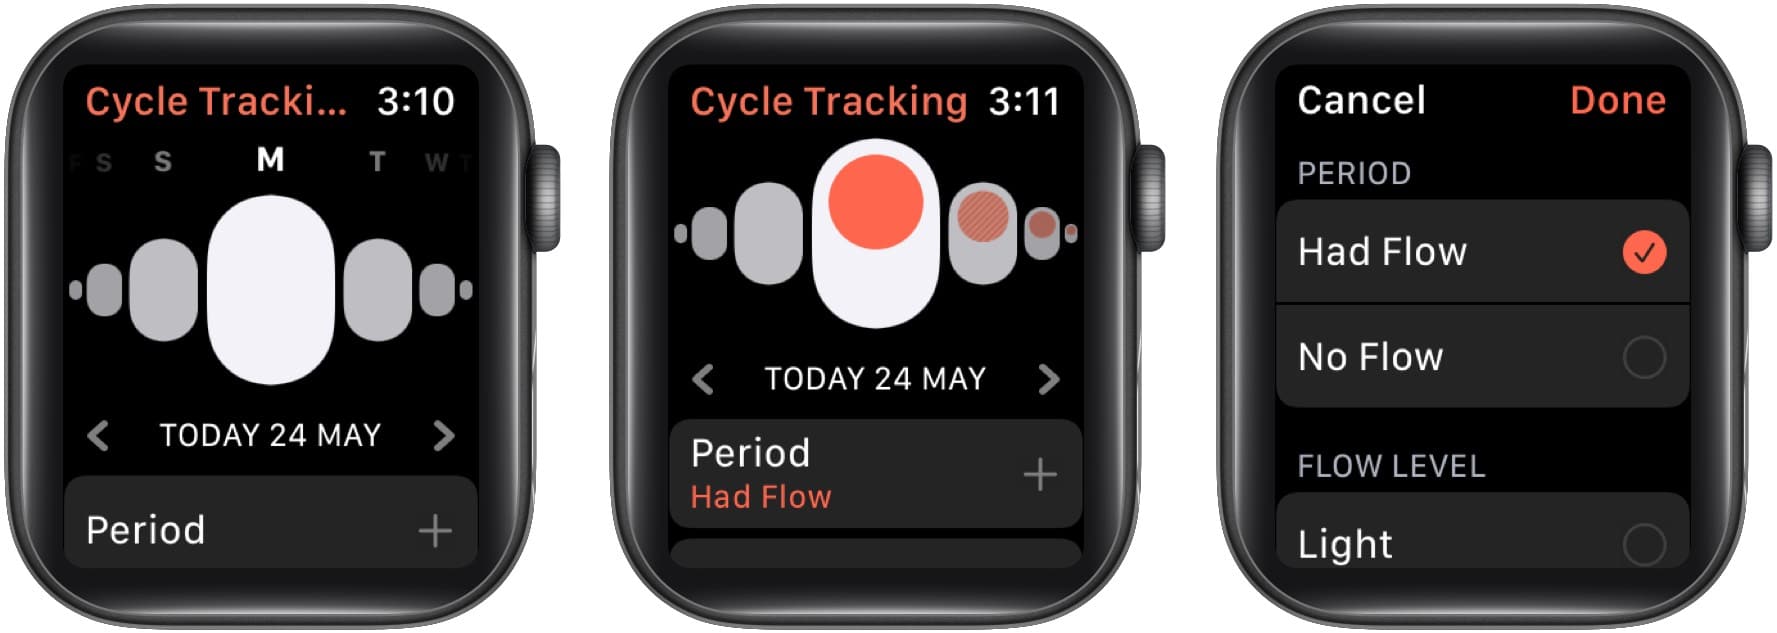 How to track your period with Cycle Tracker on Apple Watch